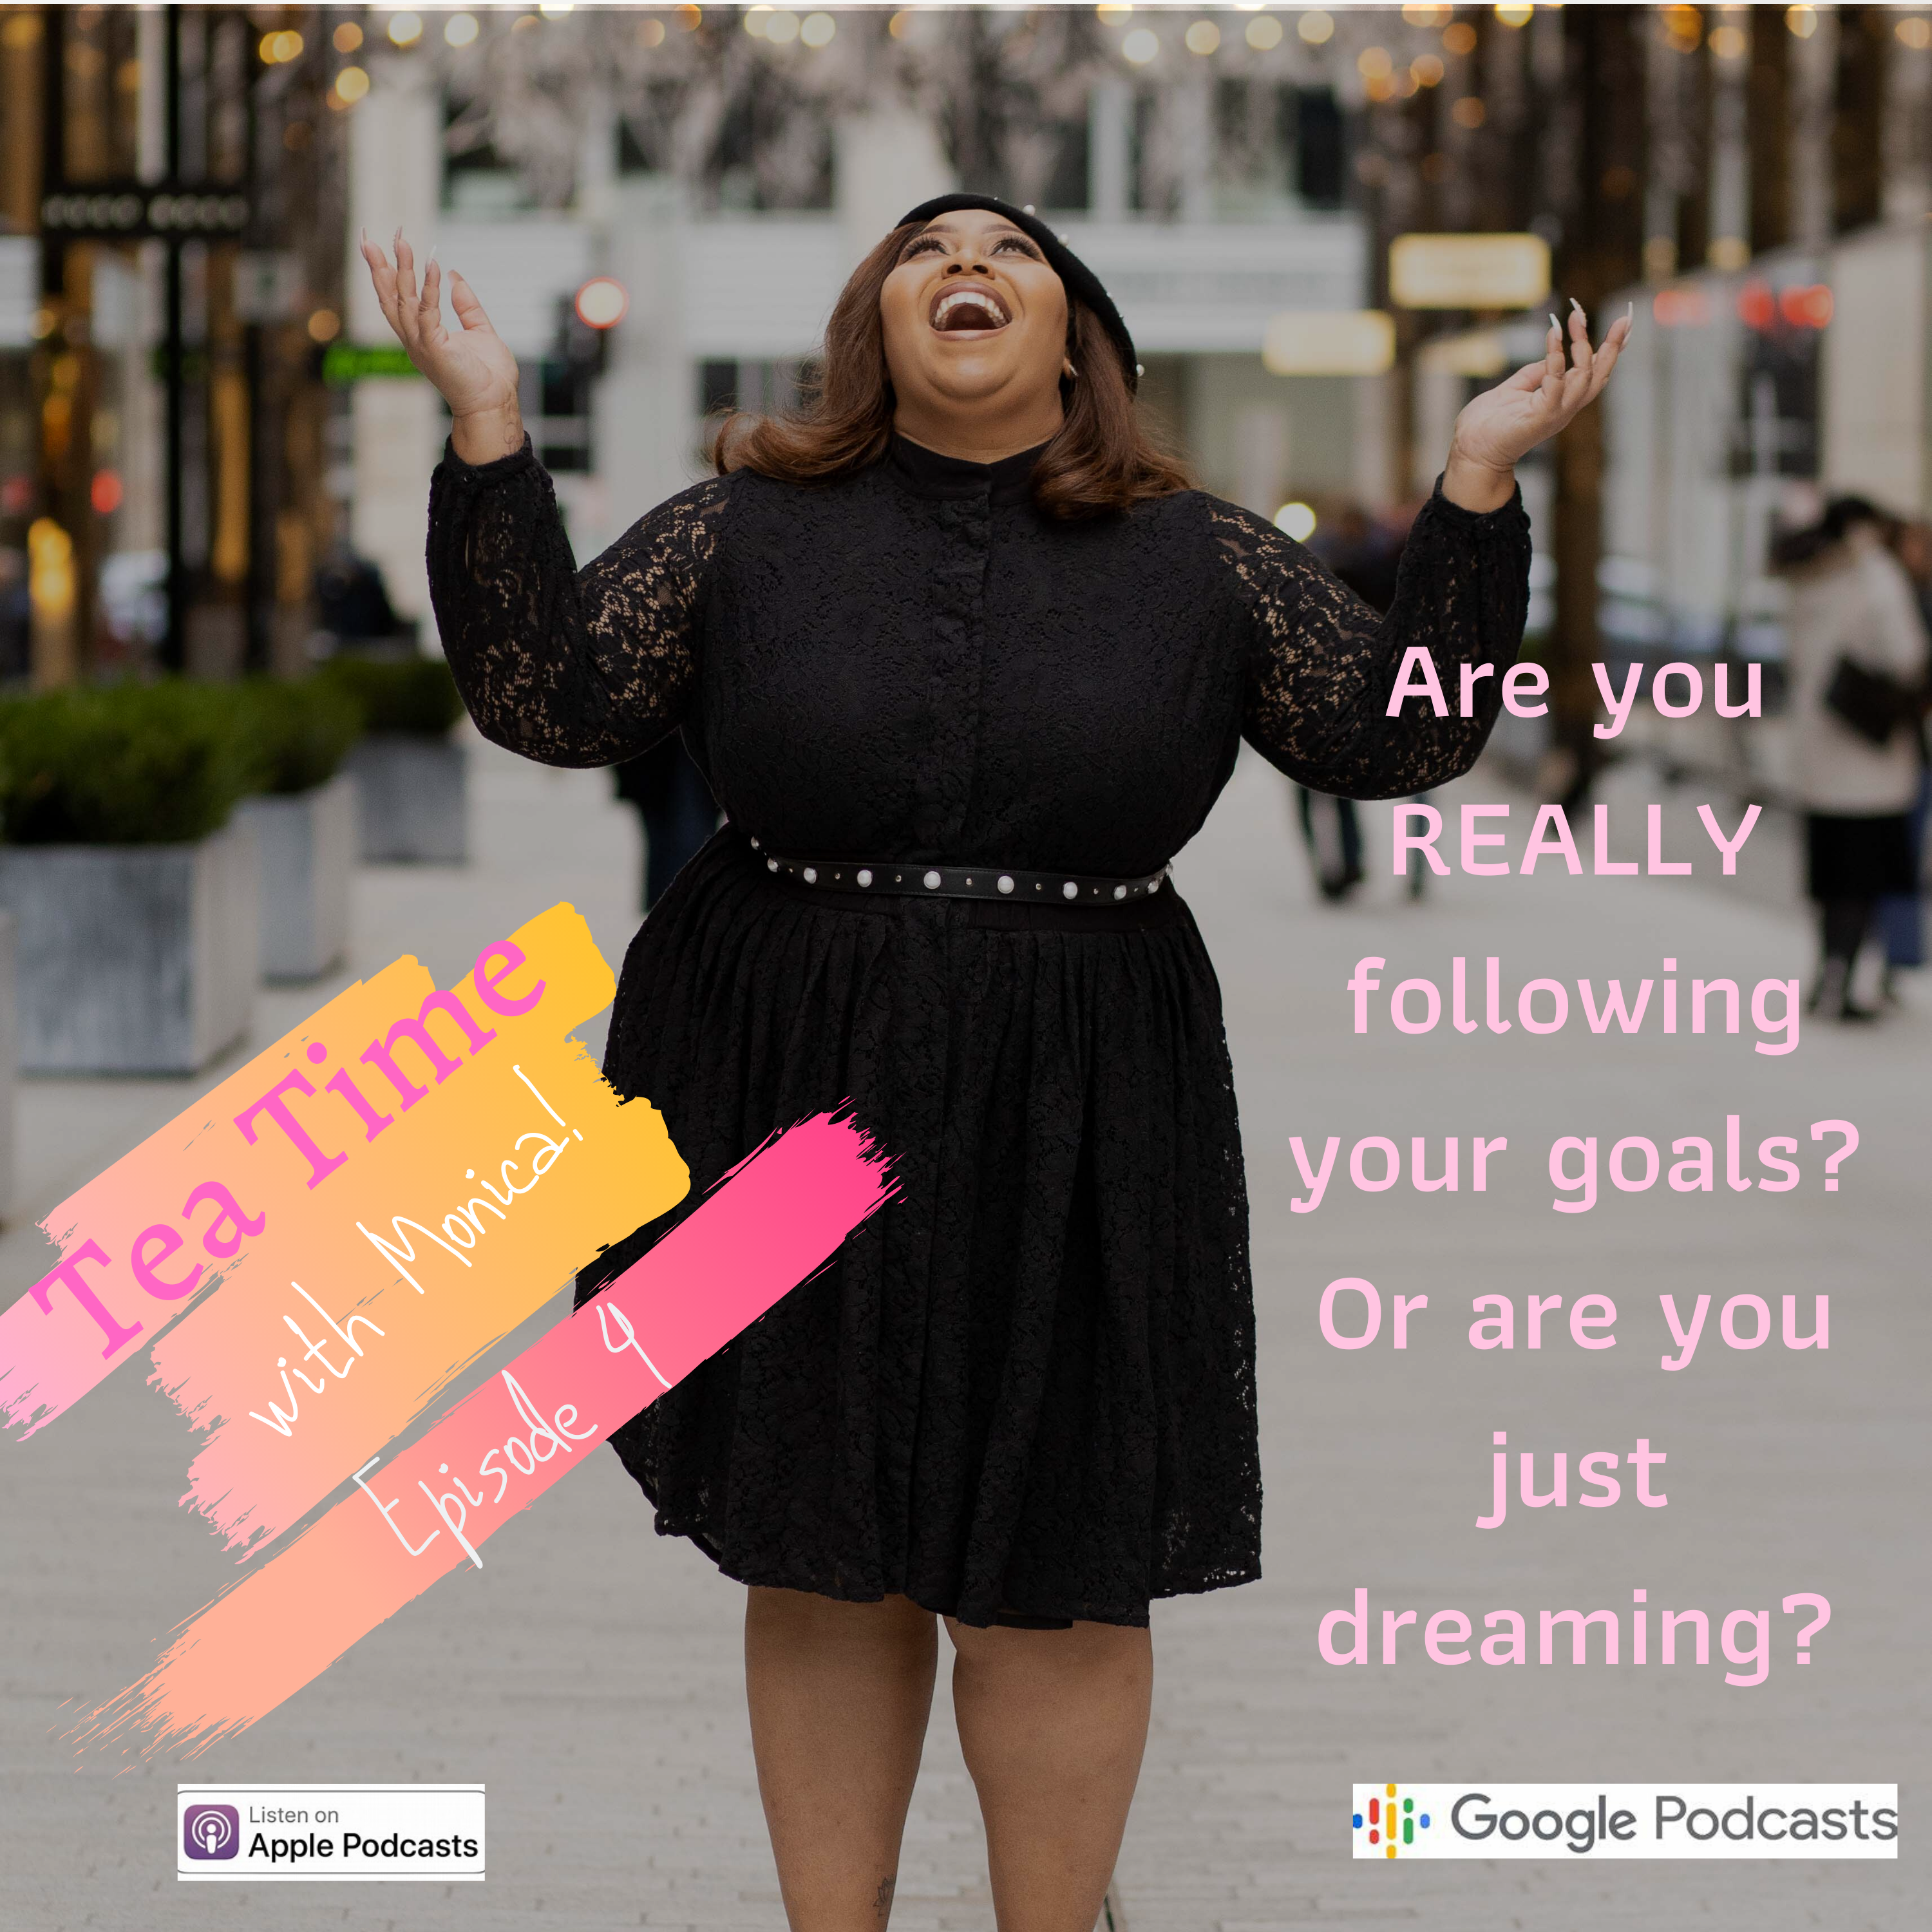 Are you REALLY following your goals? Or are you just dreaming?